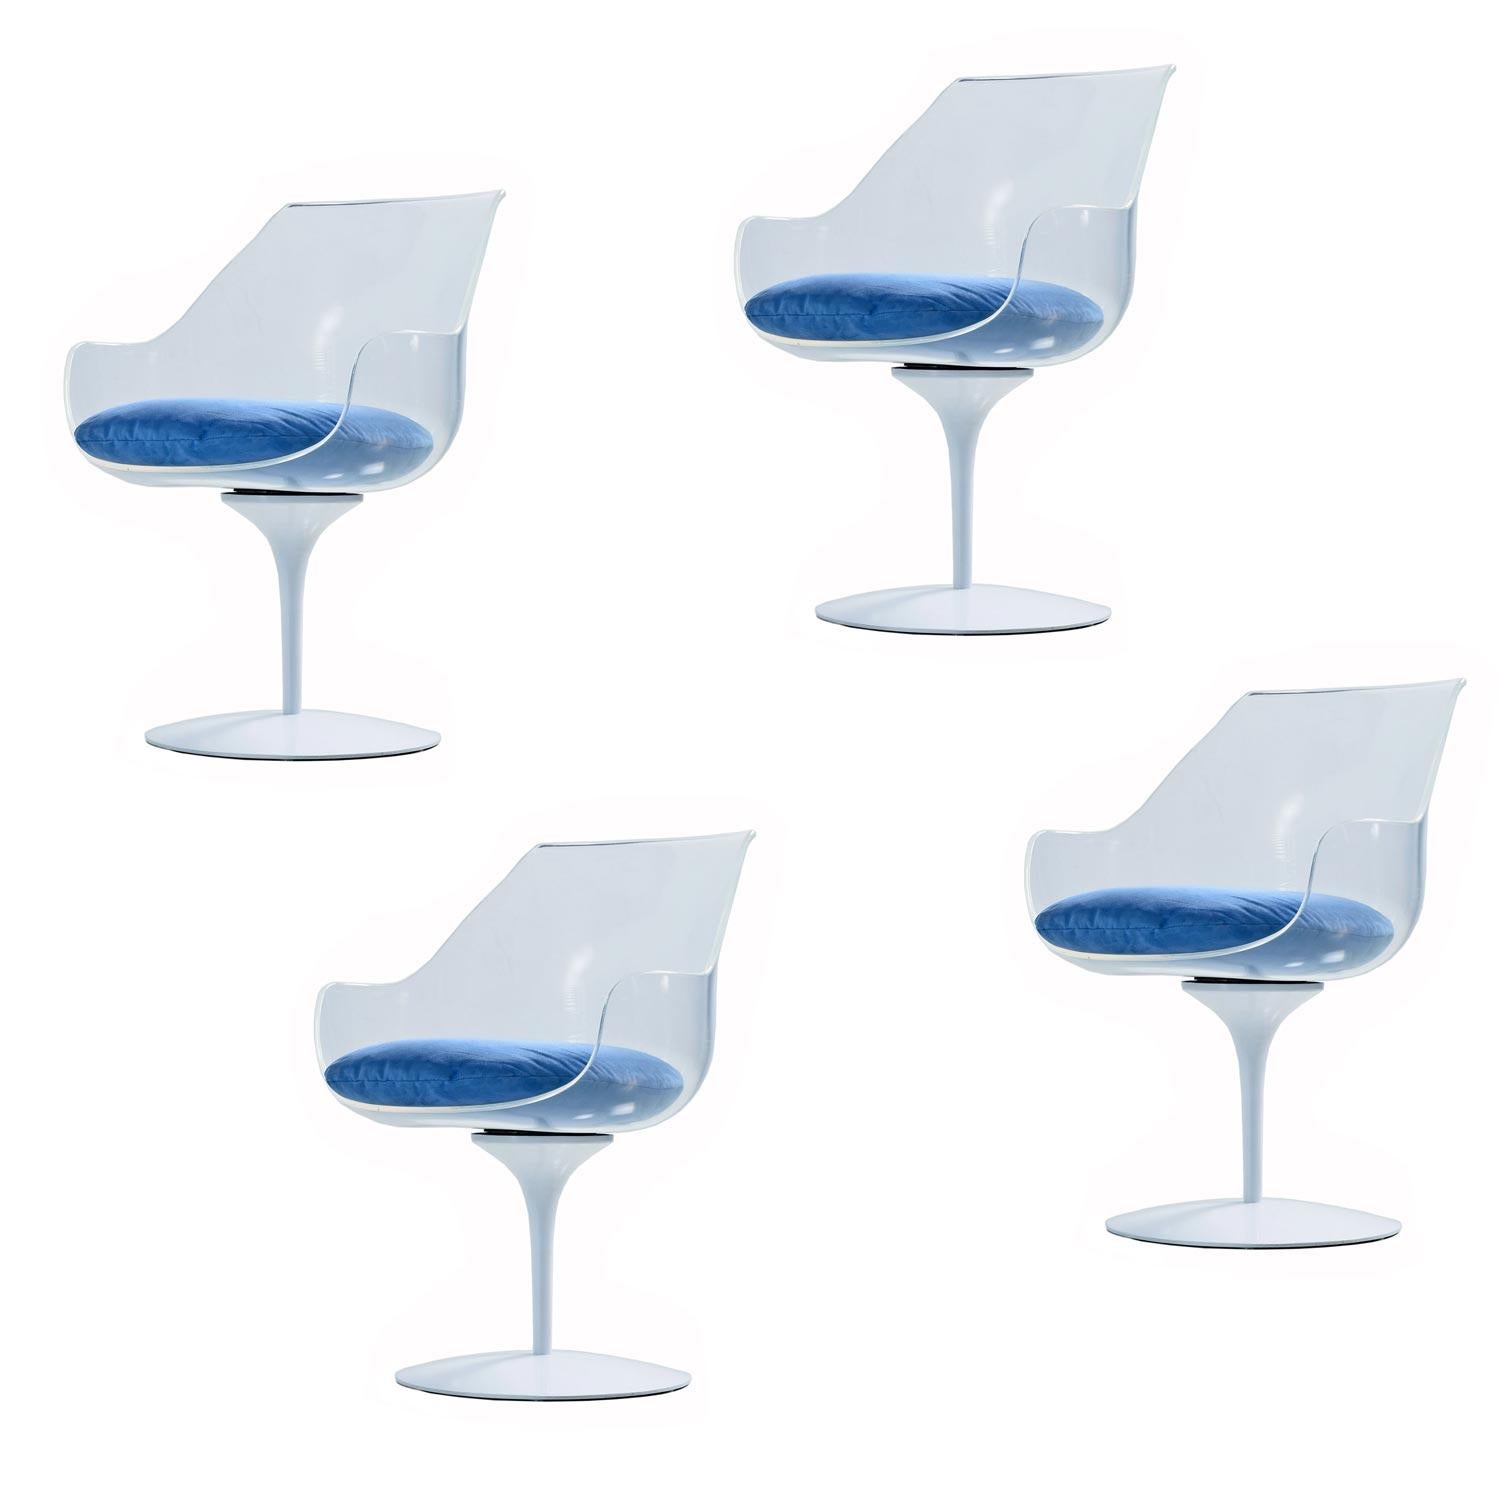 (4) available, each sold separately. 
Authentic, Mid-Century Modern Lucite acrylic Erwine & Estelle Laverne champagne chair, beautifully restored with a new gloss white paint job on the bases. Acrylic has been cleaned and buffed to very good